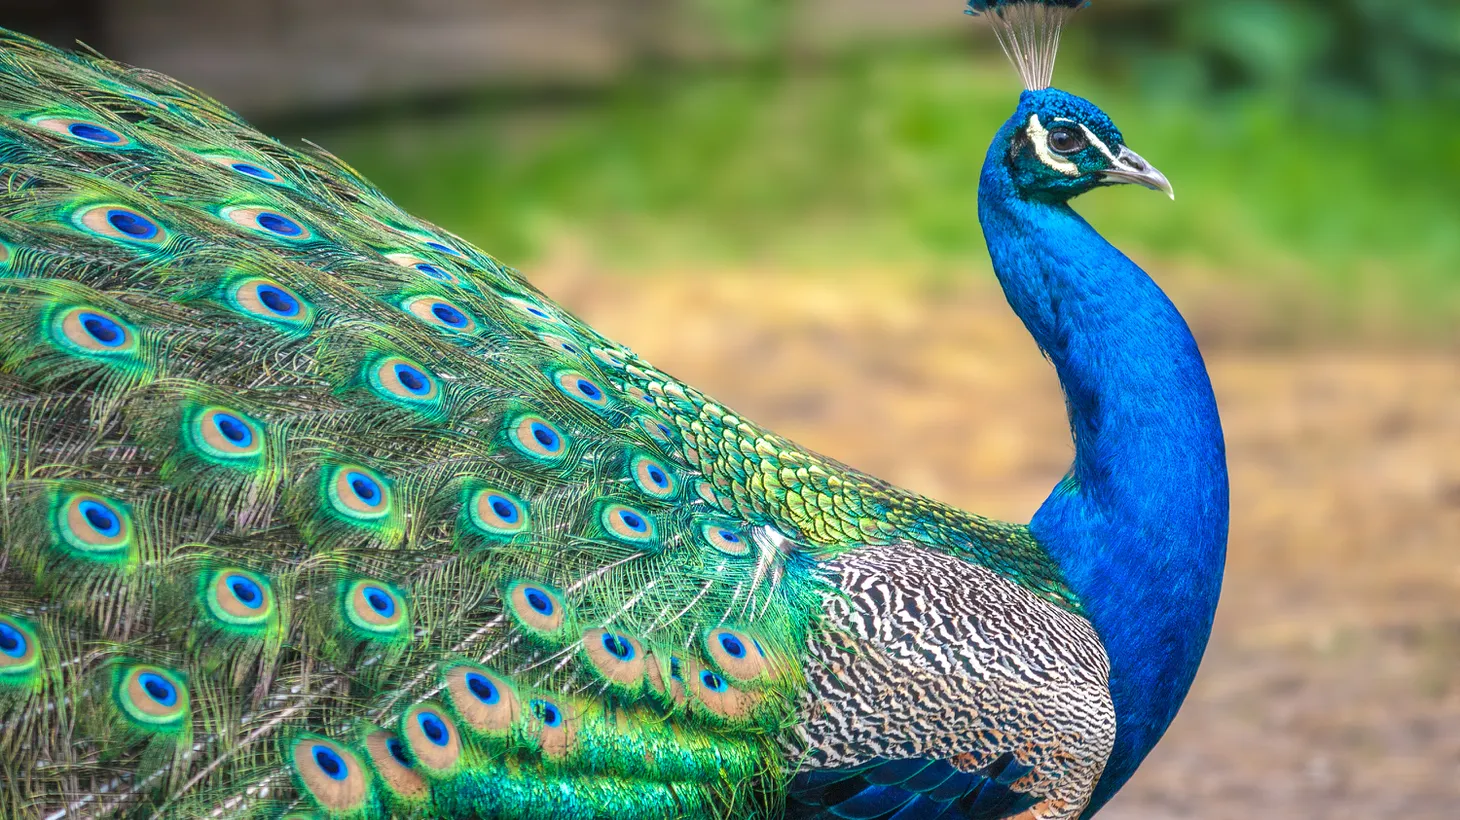 Roaming bands of non-native peafowl make their homes in leafy California suburbs, and that doesn’t fly with some residents.